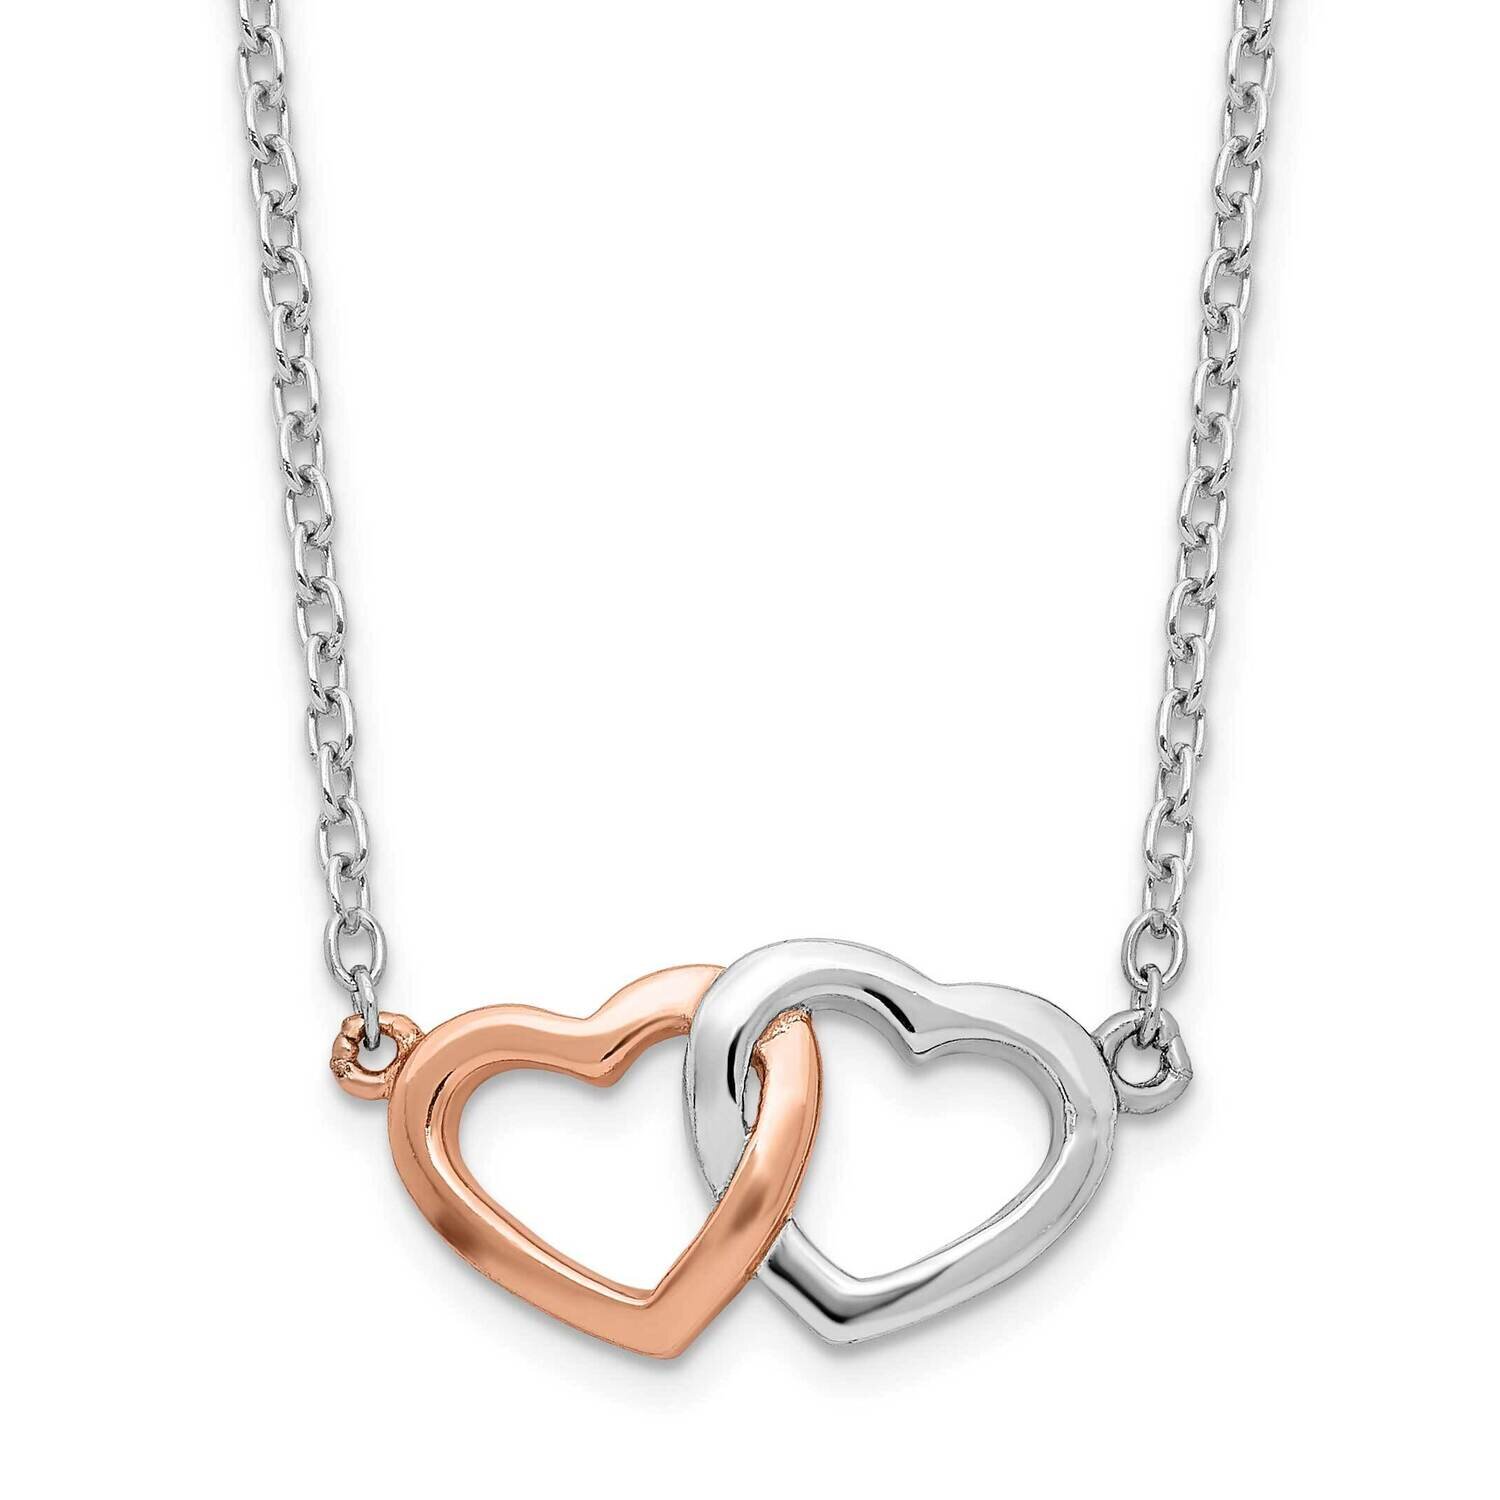 Rose Tone Polished Hearts Necklace 18 Inch Sterling Silver Rhodium-Plated QG6083-18